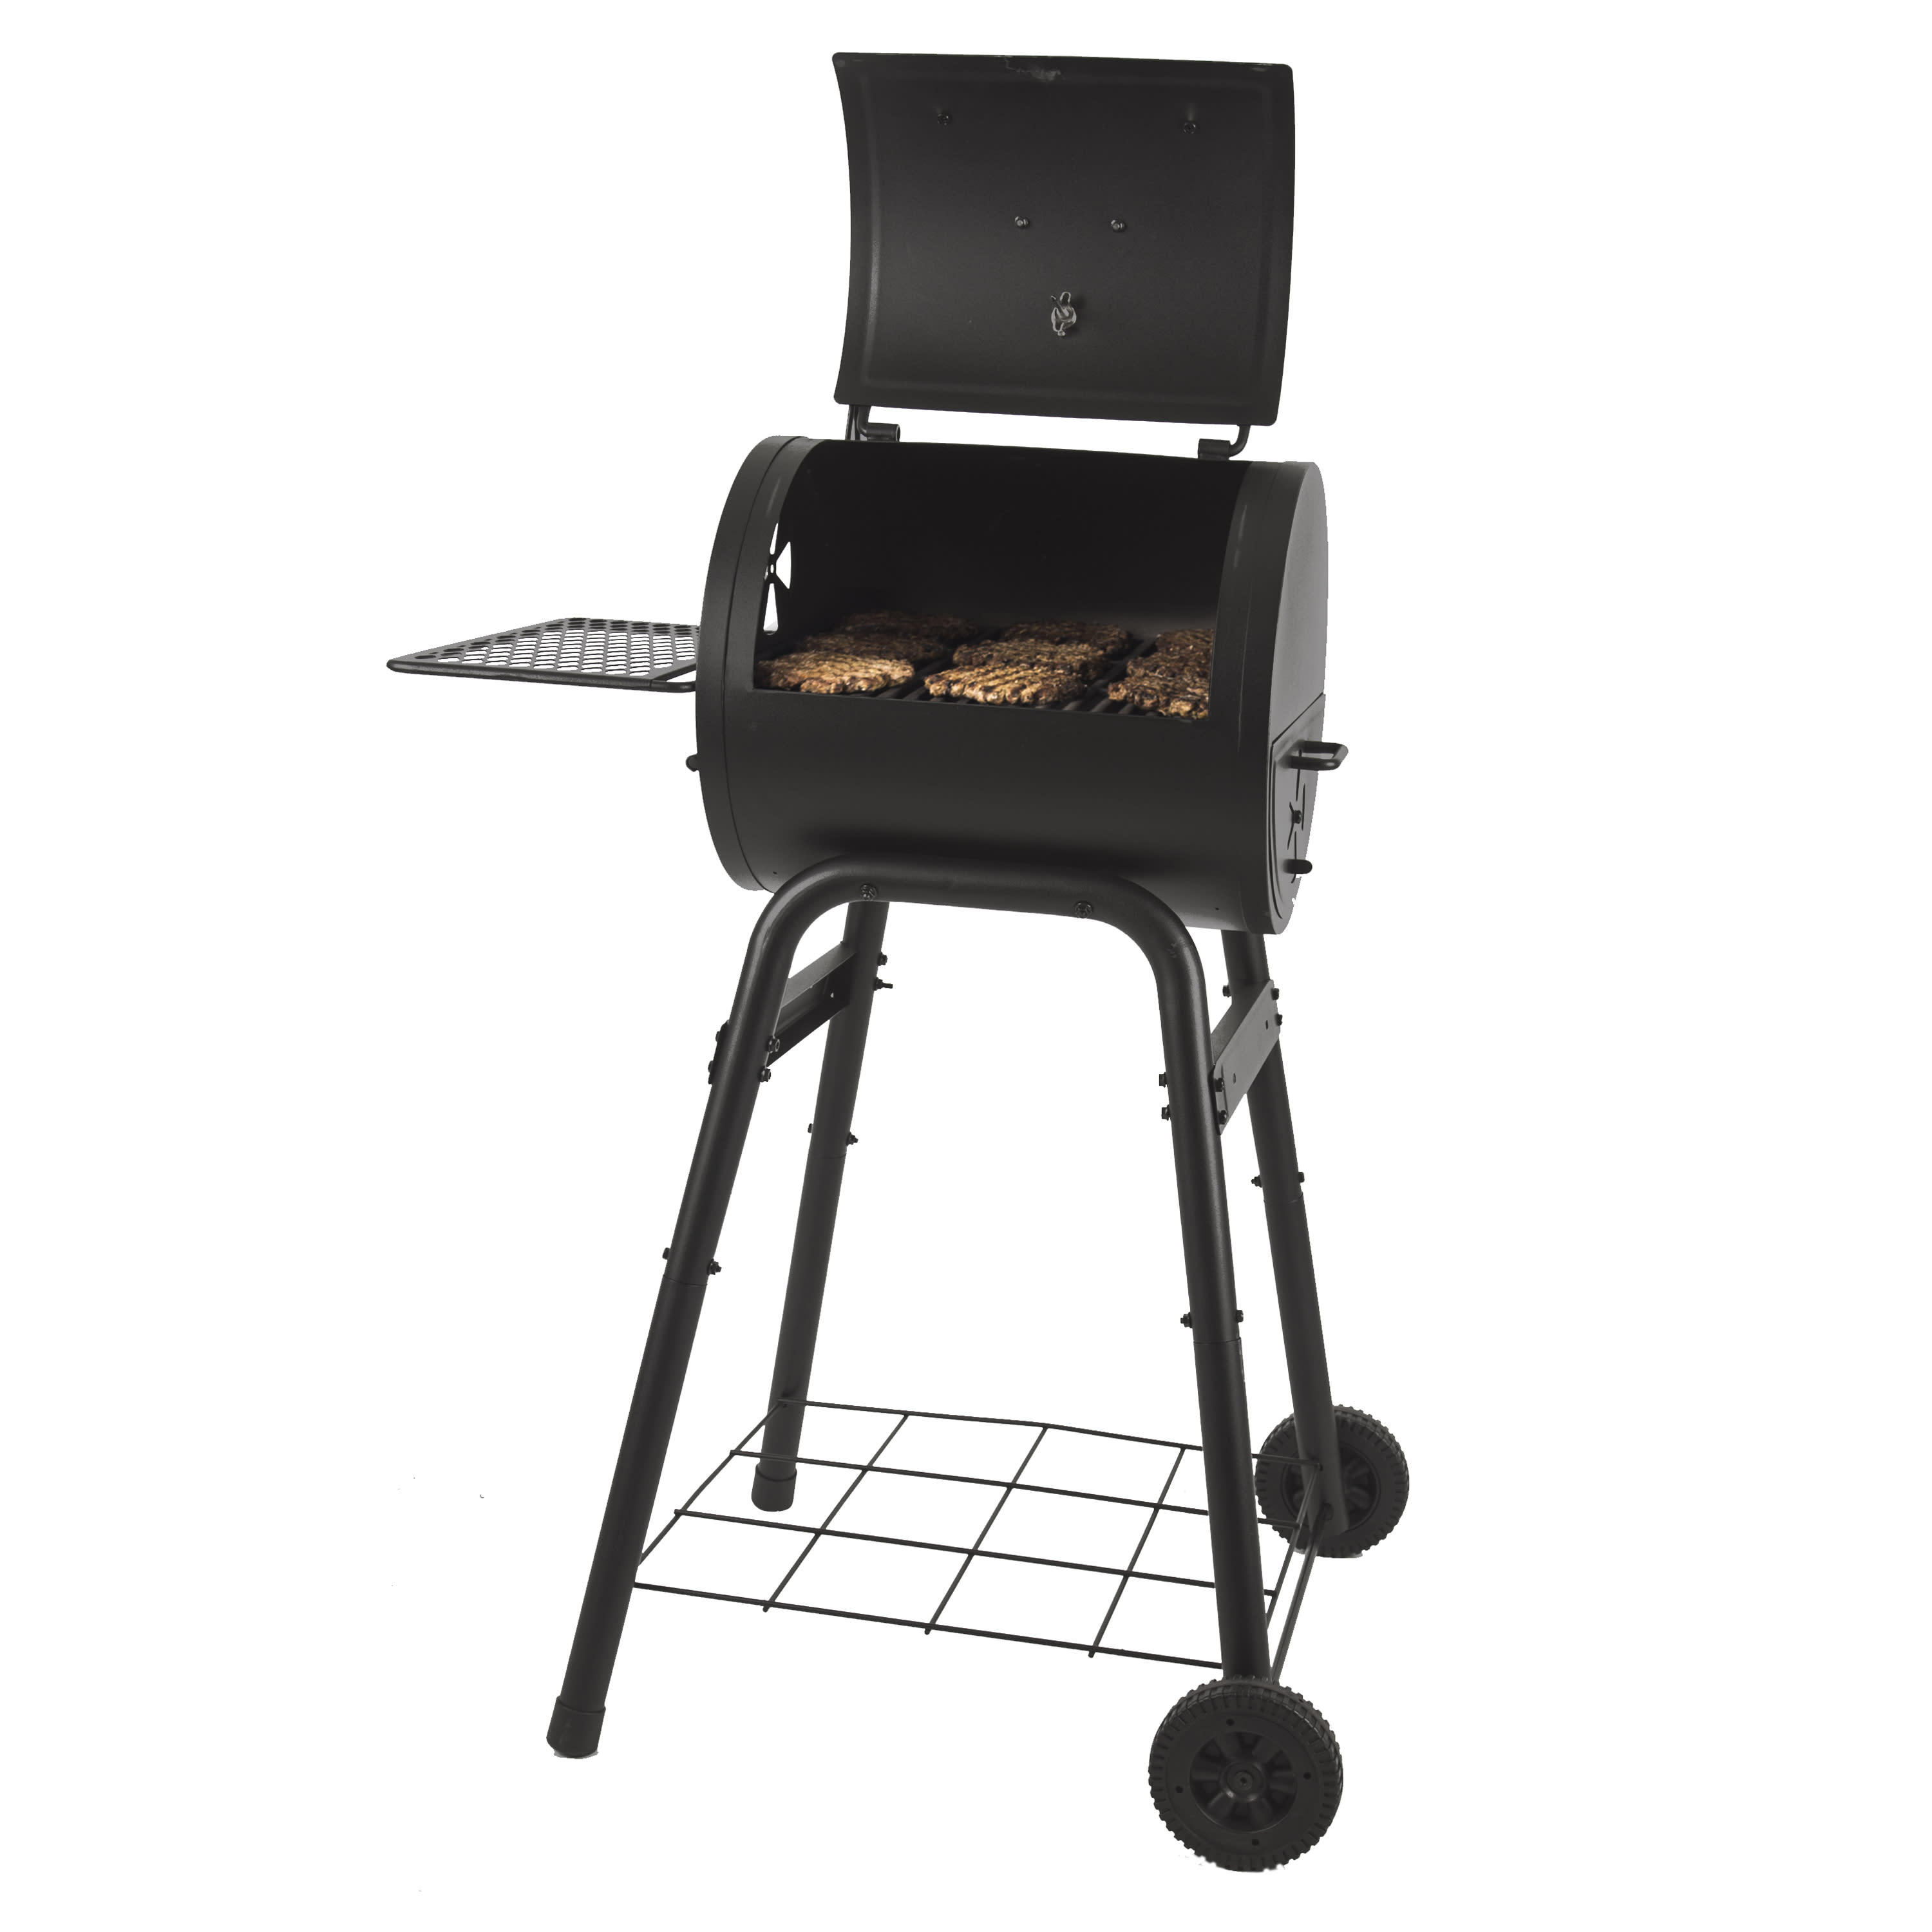 Dyna-Glo Compact Charcoal Grill